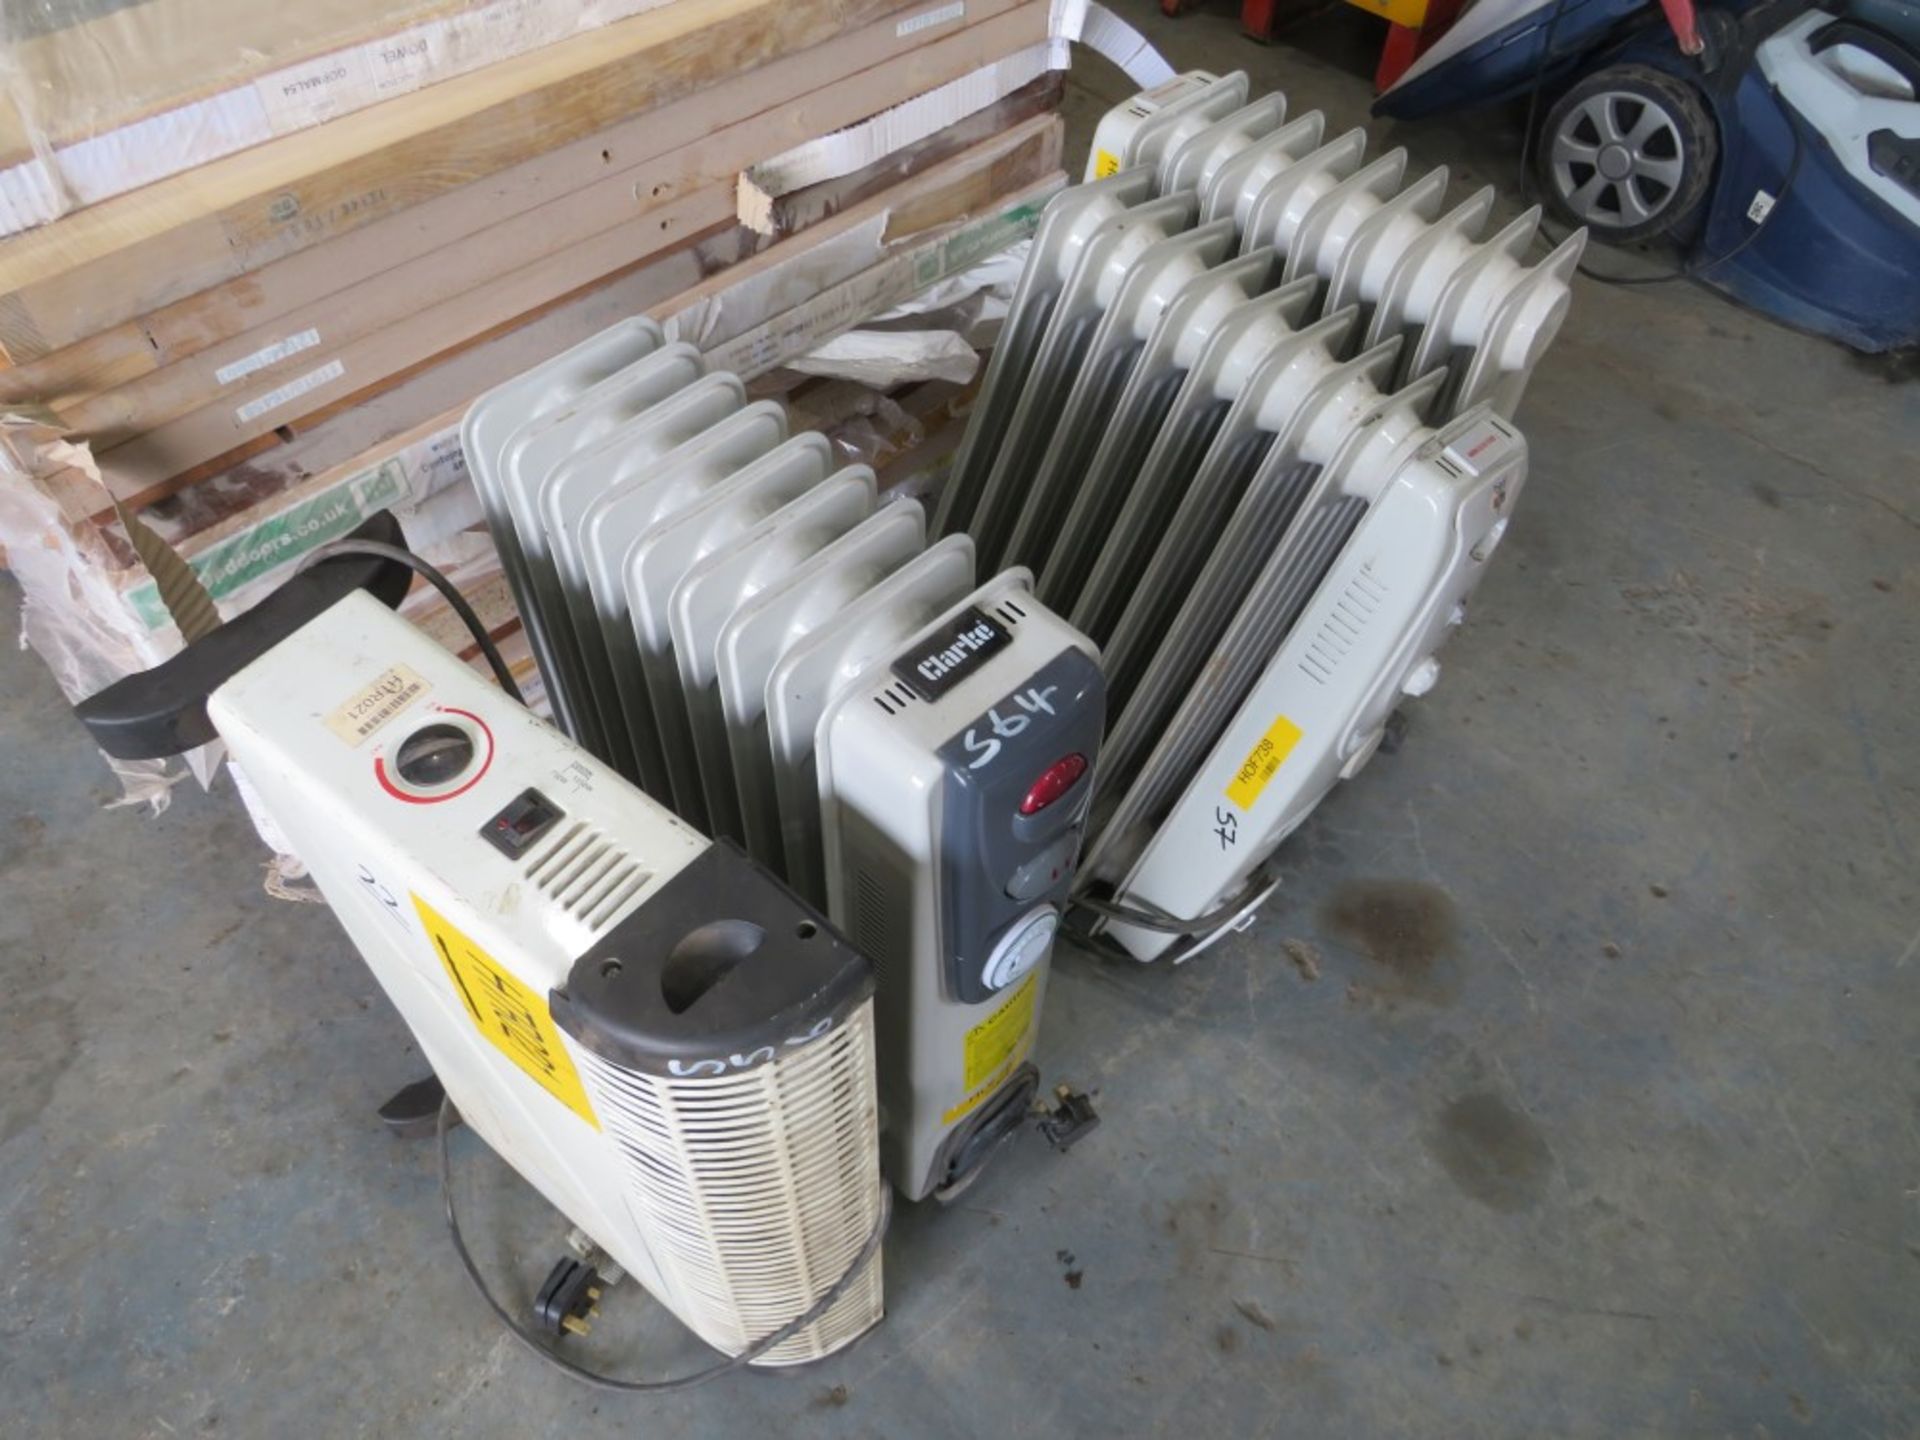 3 X 240V 2KW OIL RADIATOR HEATERS & CABINET HEATER (DIRECT HIRE CO [+ VAT]